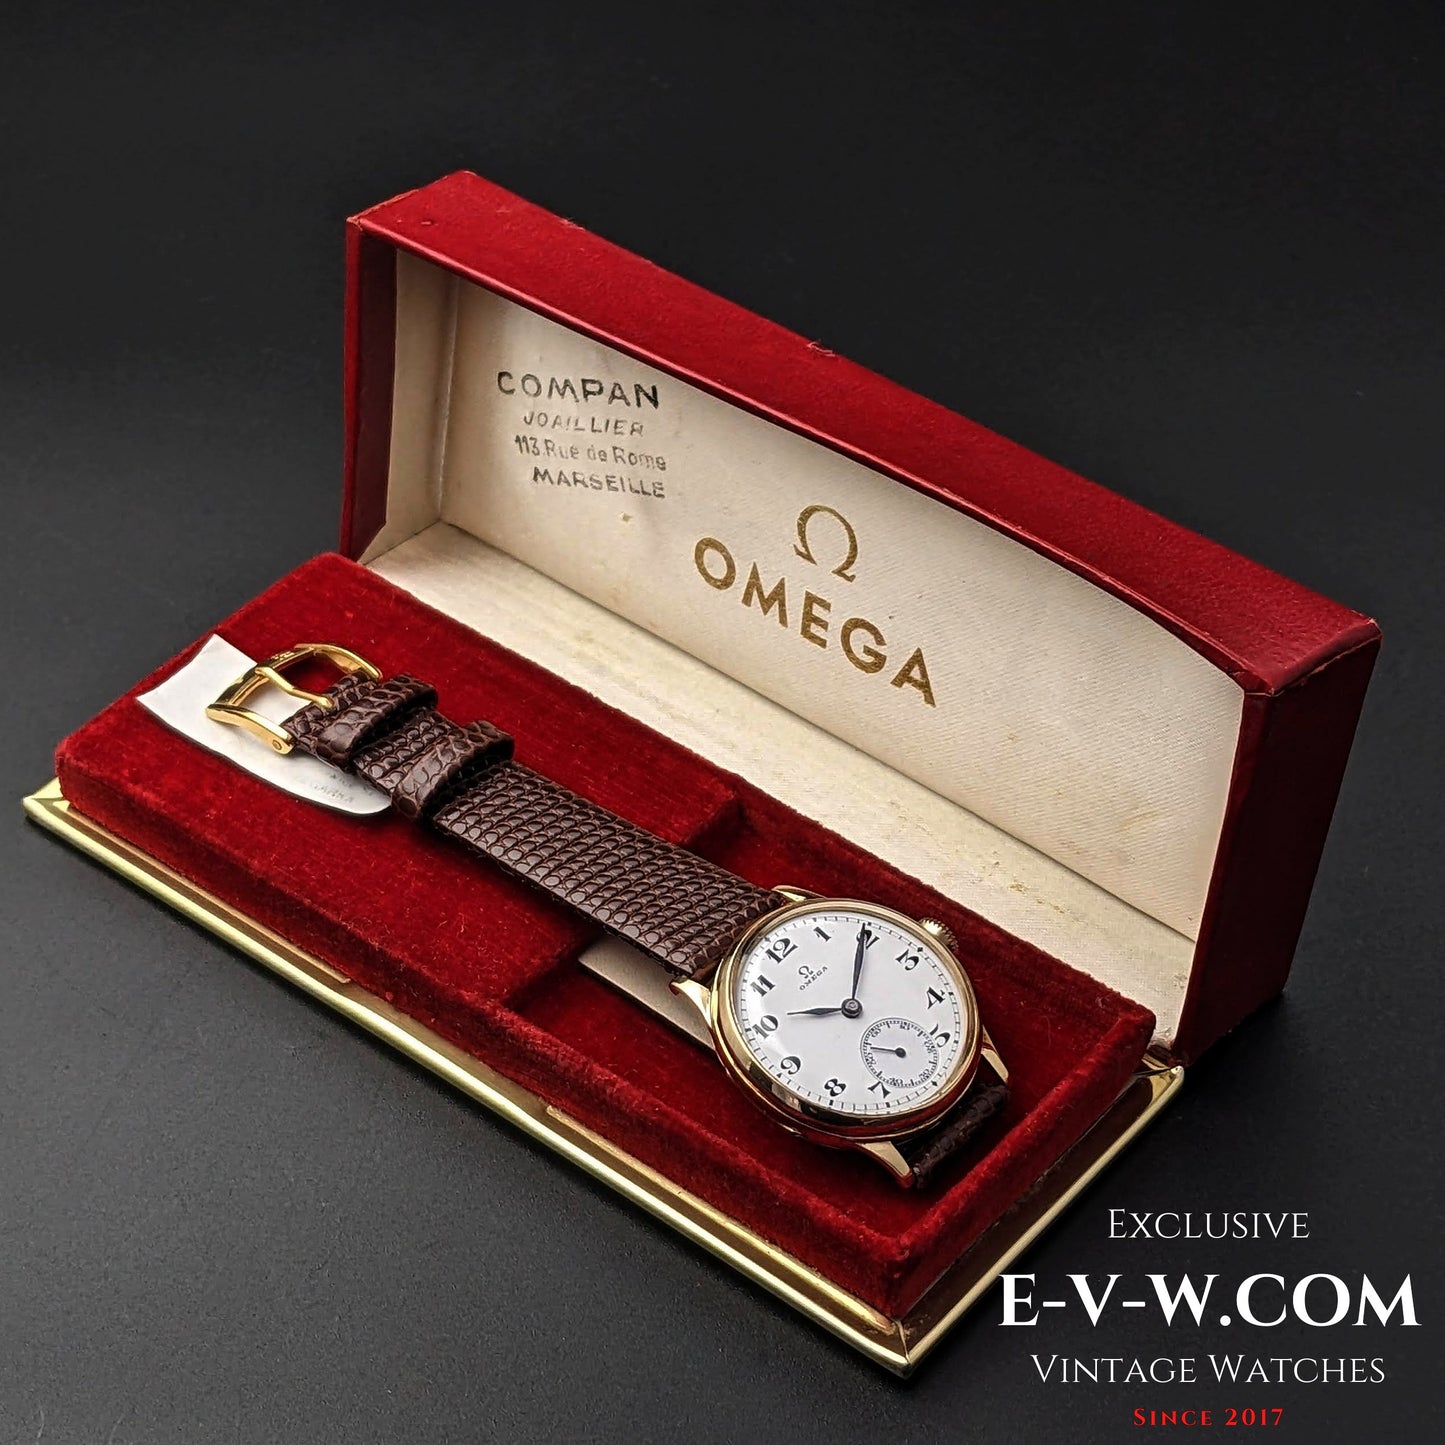 Unique / One of the firs Omega wristwatches Antique 1915 / Omega 18k Gold /  Cal12'''S7-16p  / Fully Serviced